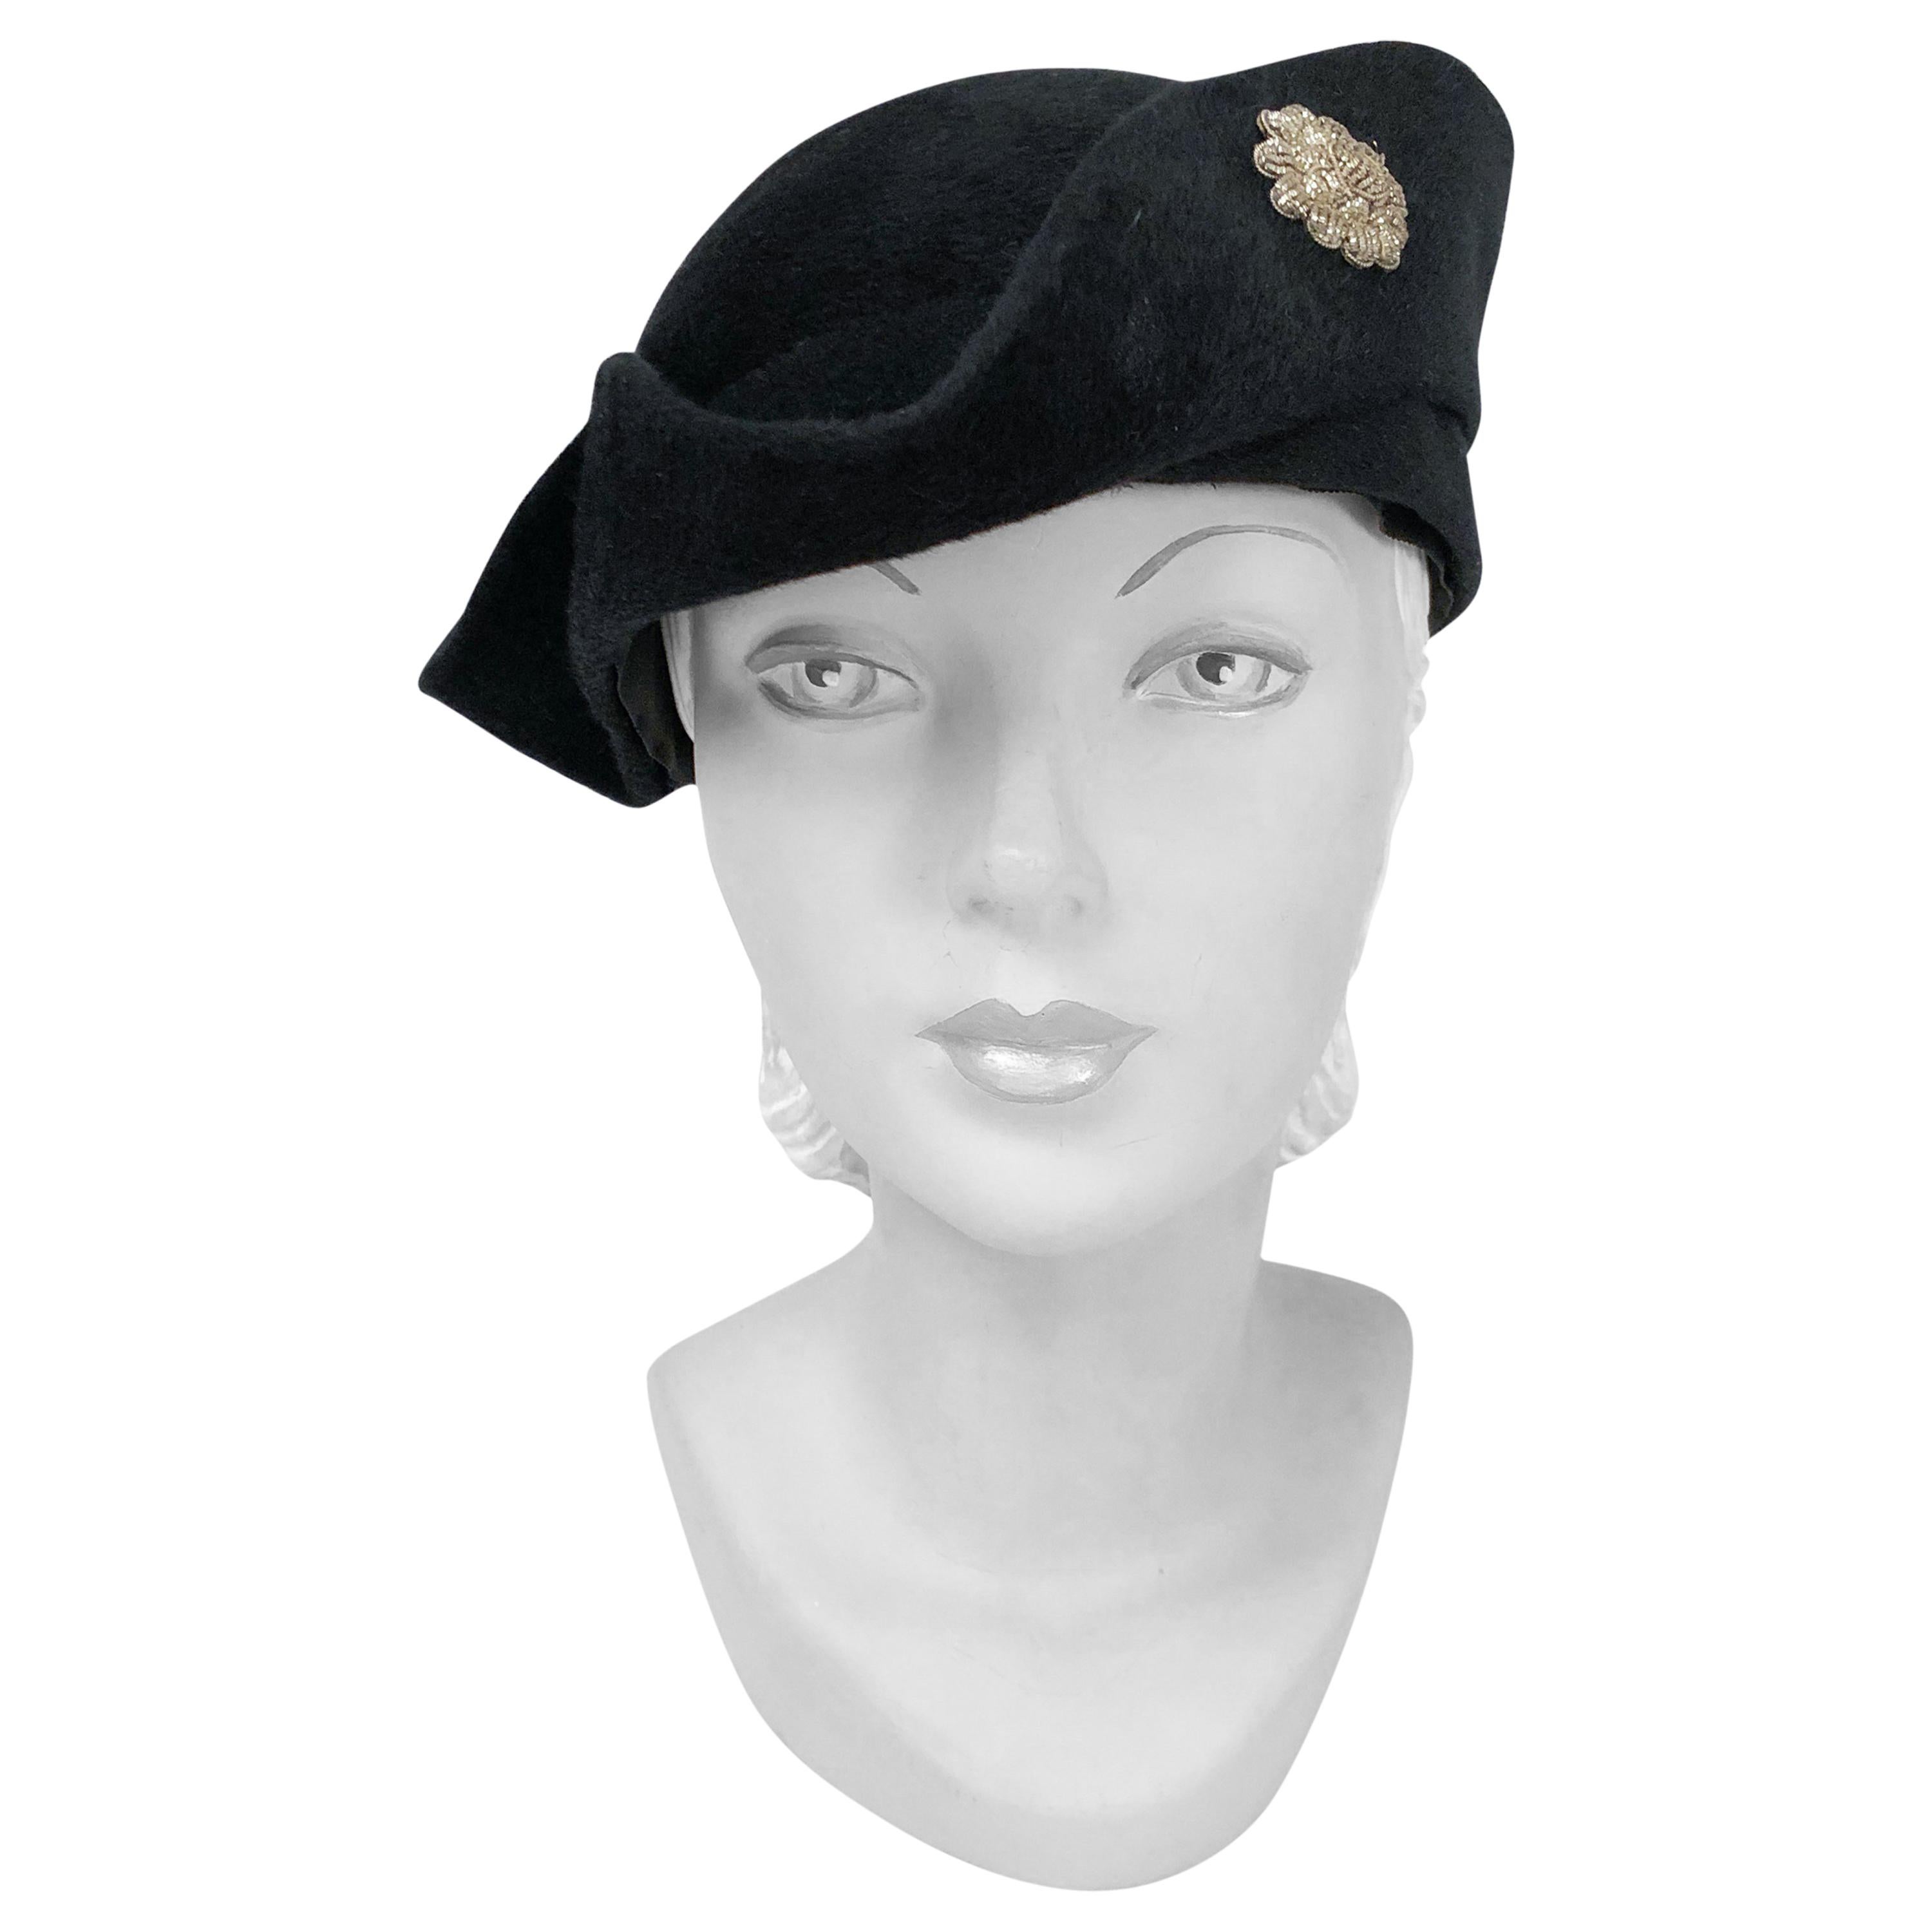 1930s Black Cashmere Felt Pirate Hat with Sterling Silver Accent